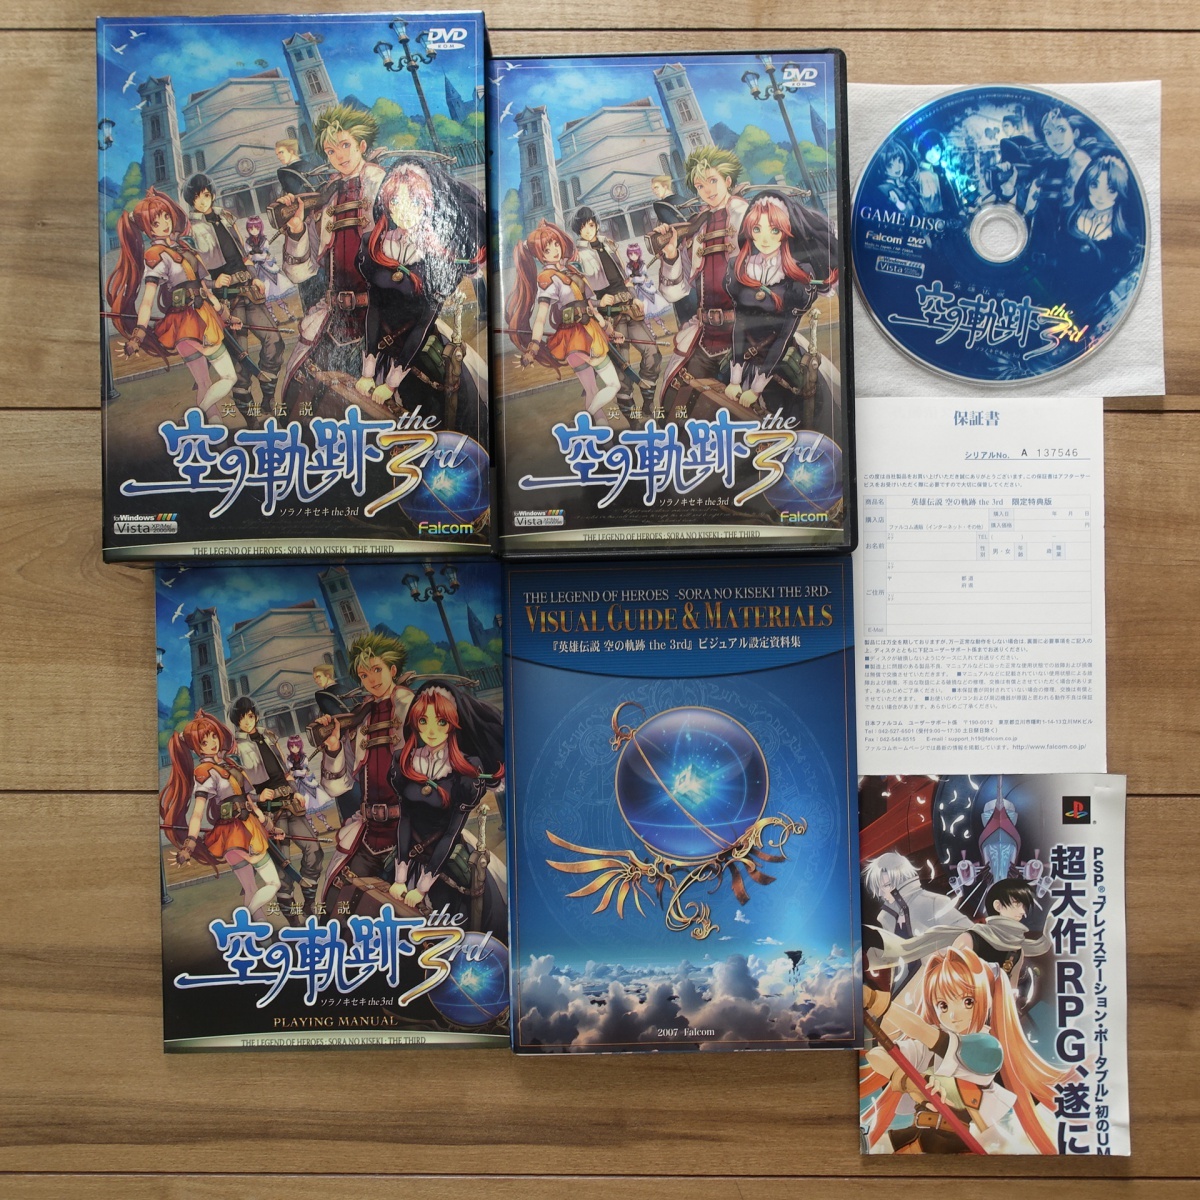  The Legend of Heroes Trails in the Sky the 3rd Falco mWindows operation goods 